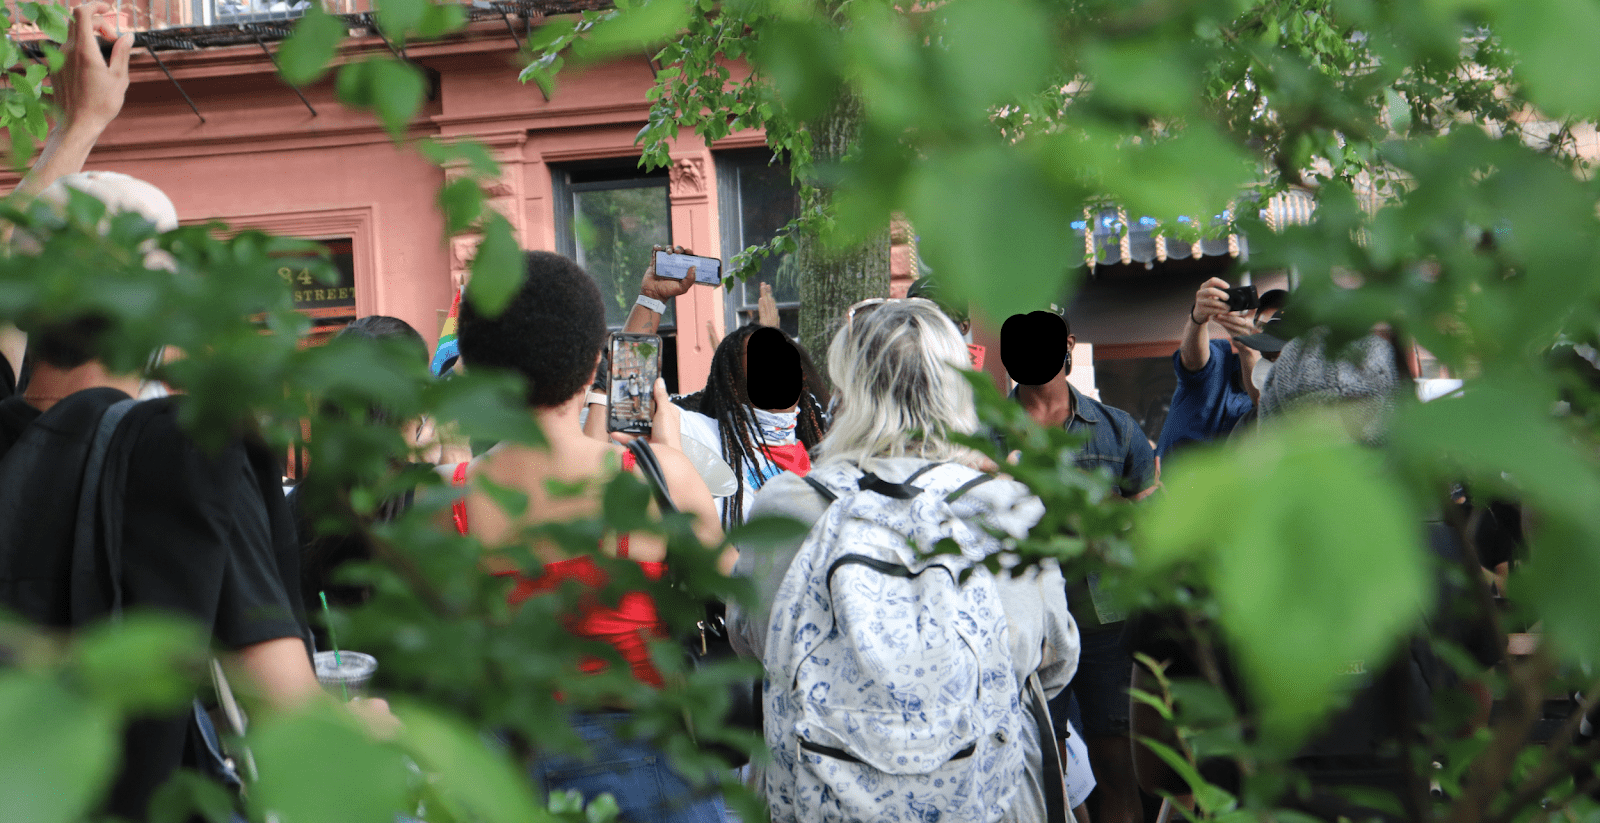 Surrounded by greenery at every angle, a group of activists and protestors raise their fists in Christopher Park, Manhattan. Photo by author.